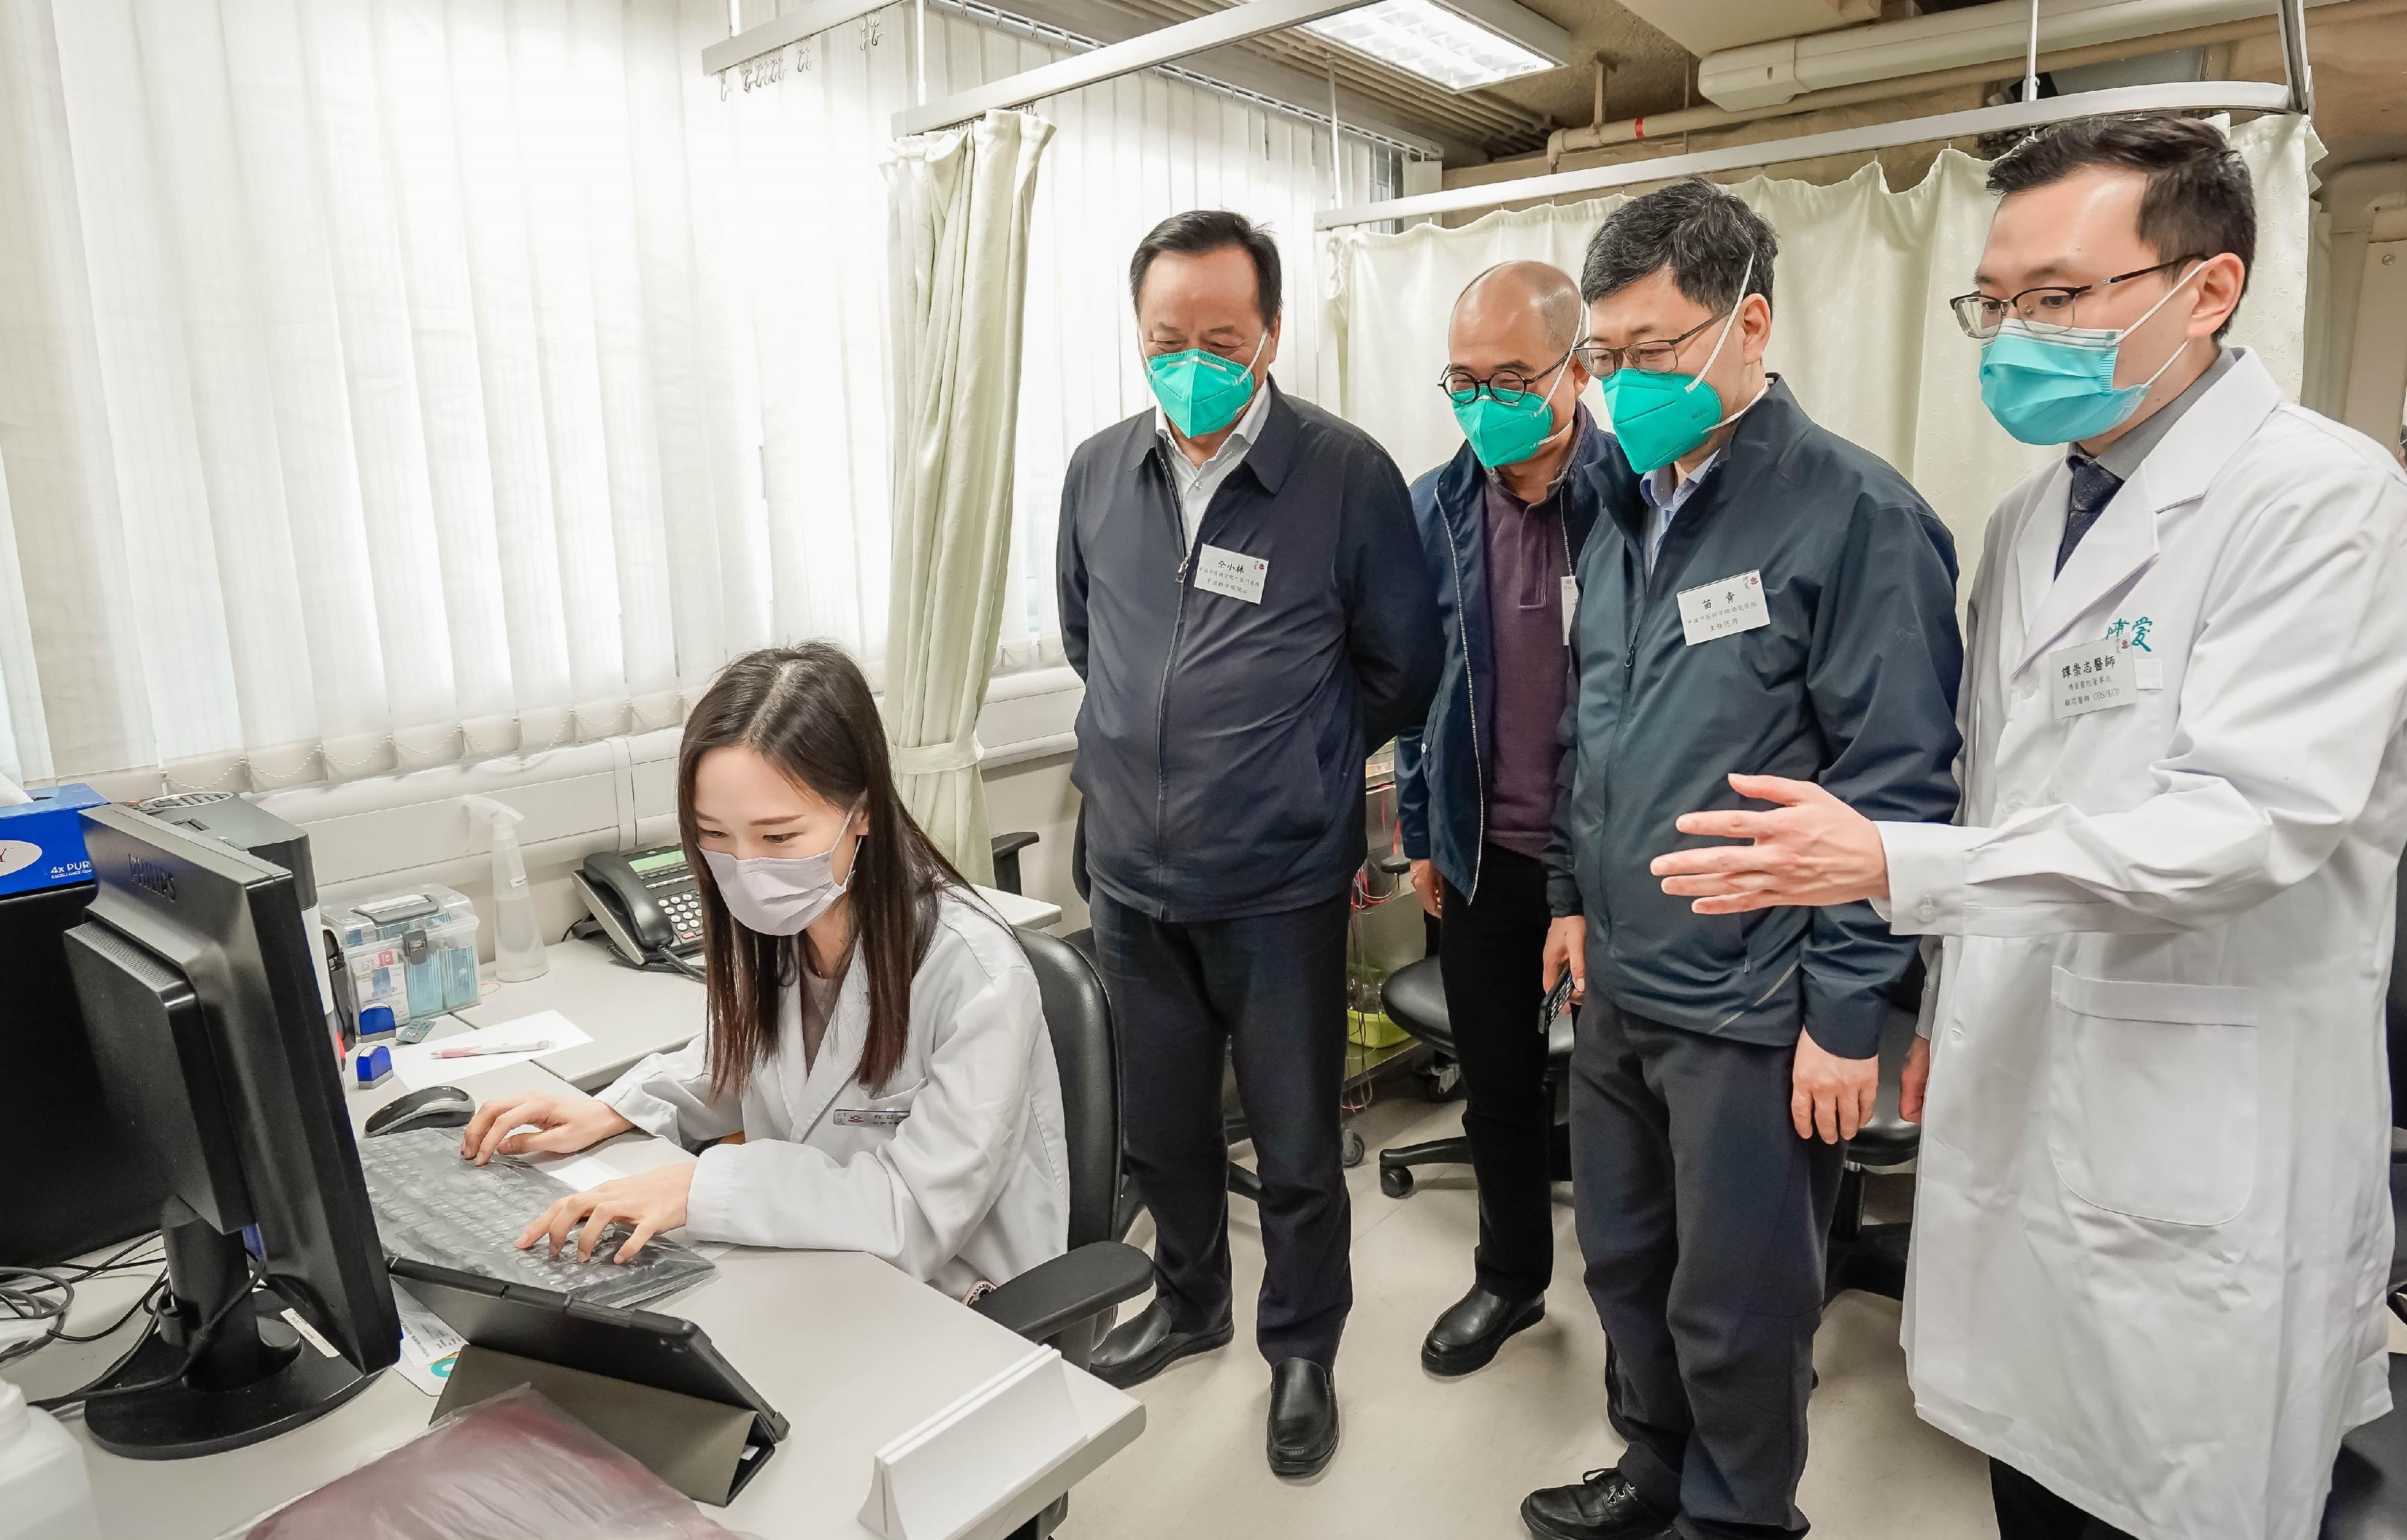 The Mainland Chinese medicine expert group of the Central Authorities today (March 31) visited the Chinese Medicine Clinic cum Training and Research Centre to understand the clinic's works on managing patients and the centre's works on training Chinese medicine practitioners.